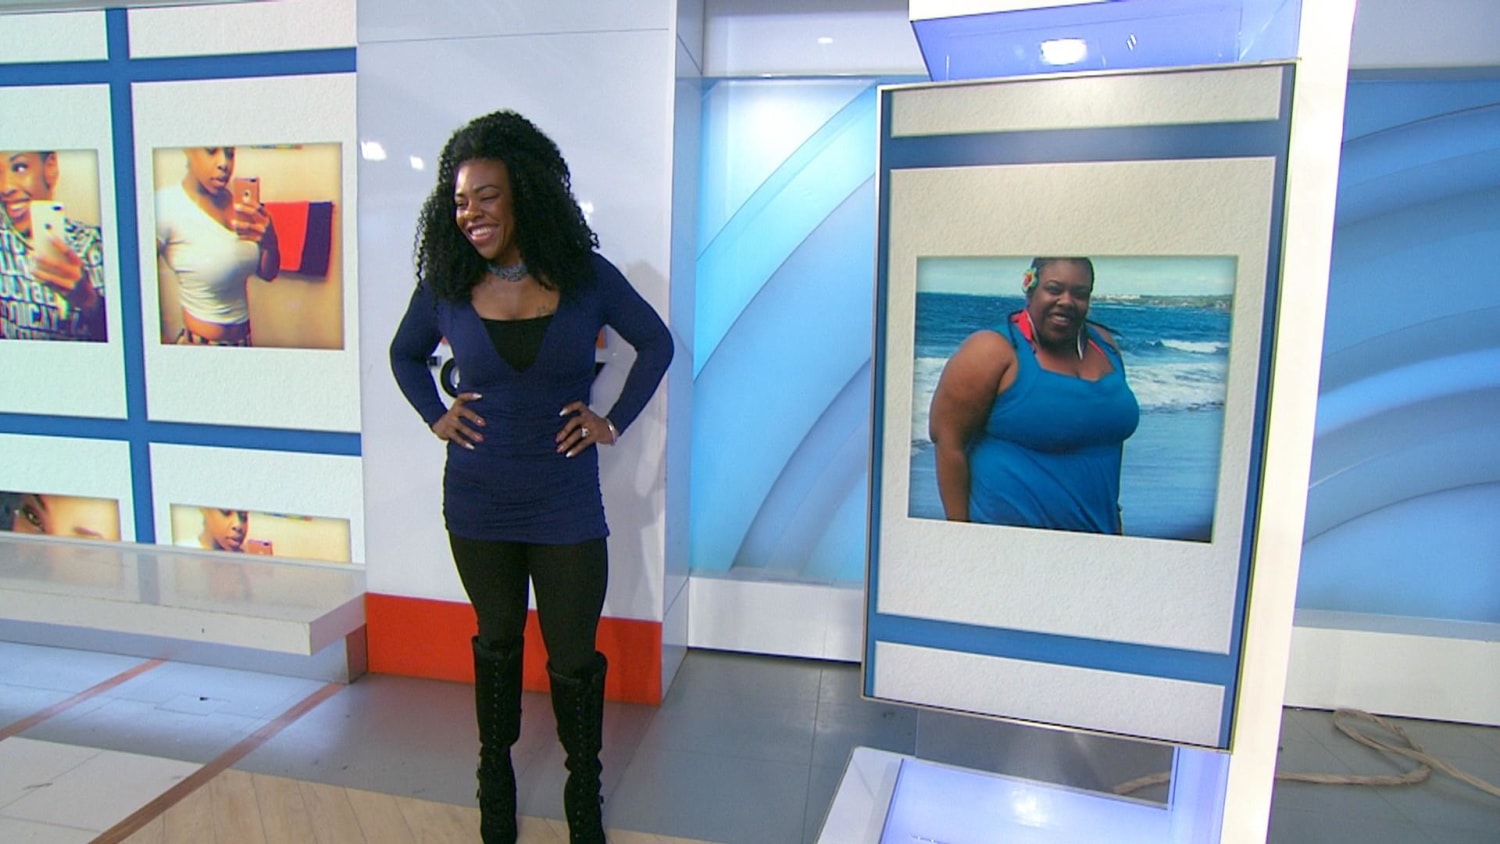 Husband-and-wife team drops 70 pounds of fat